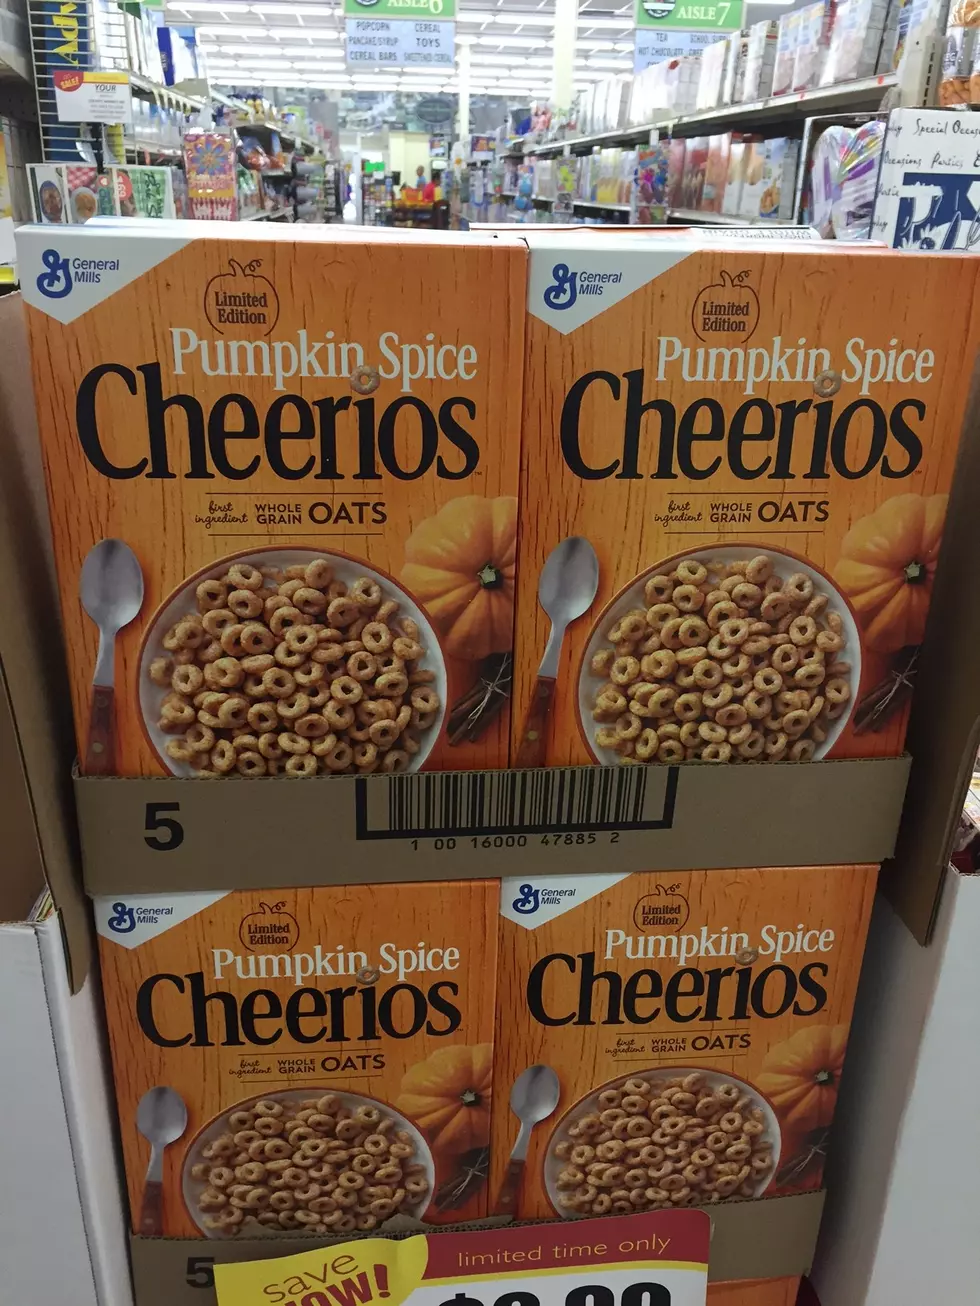 To Early For Pumpkin Spiced Products To Be Out?